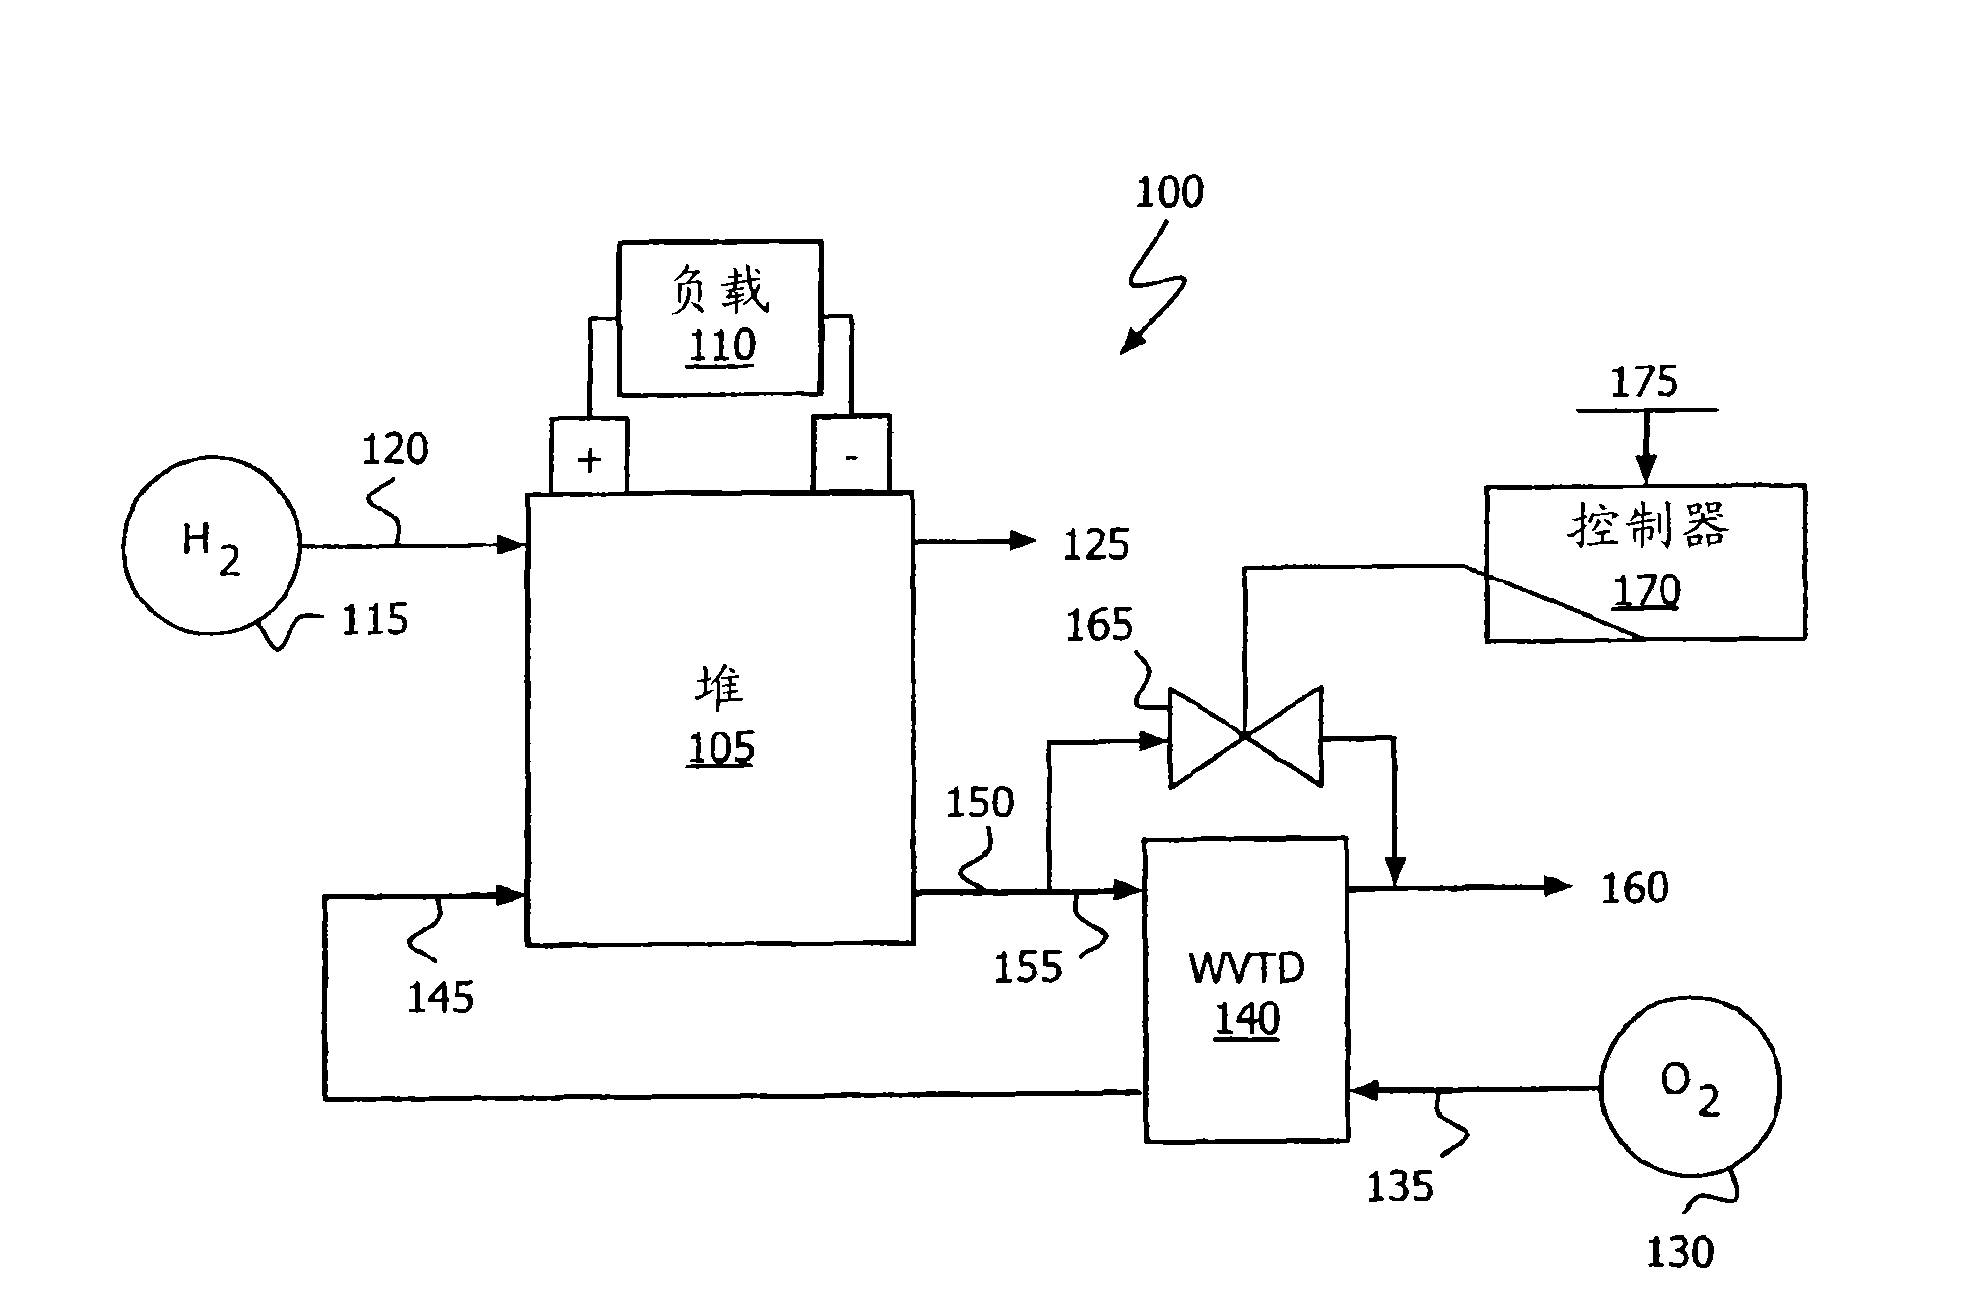 Fuel cell system cathode inlet relative humidity control